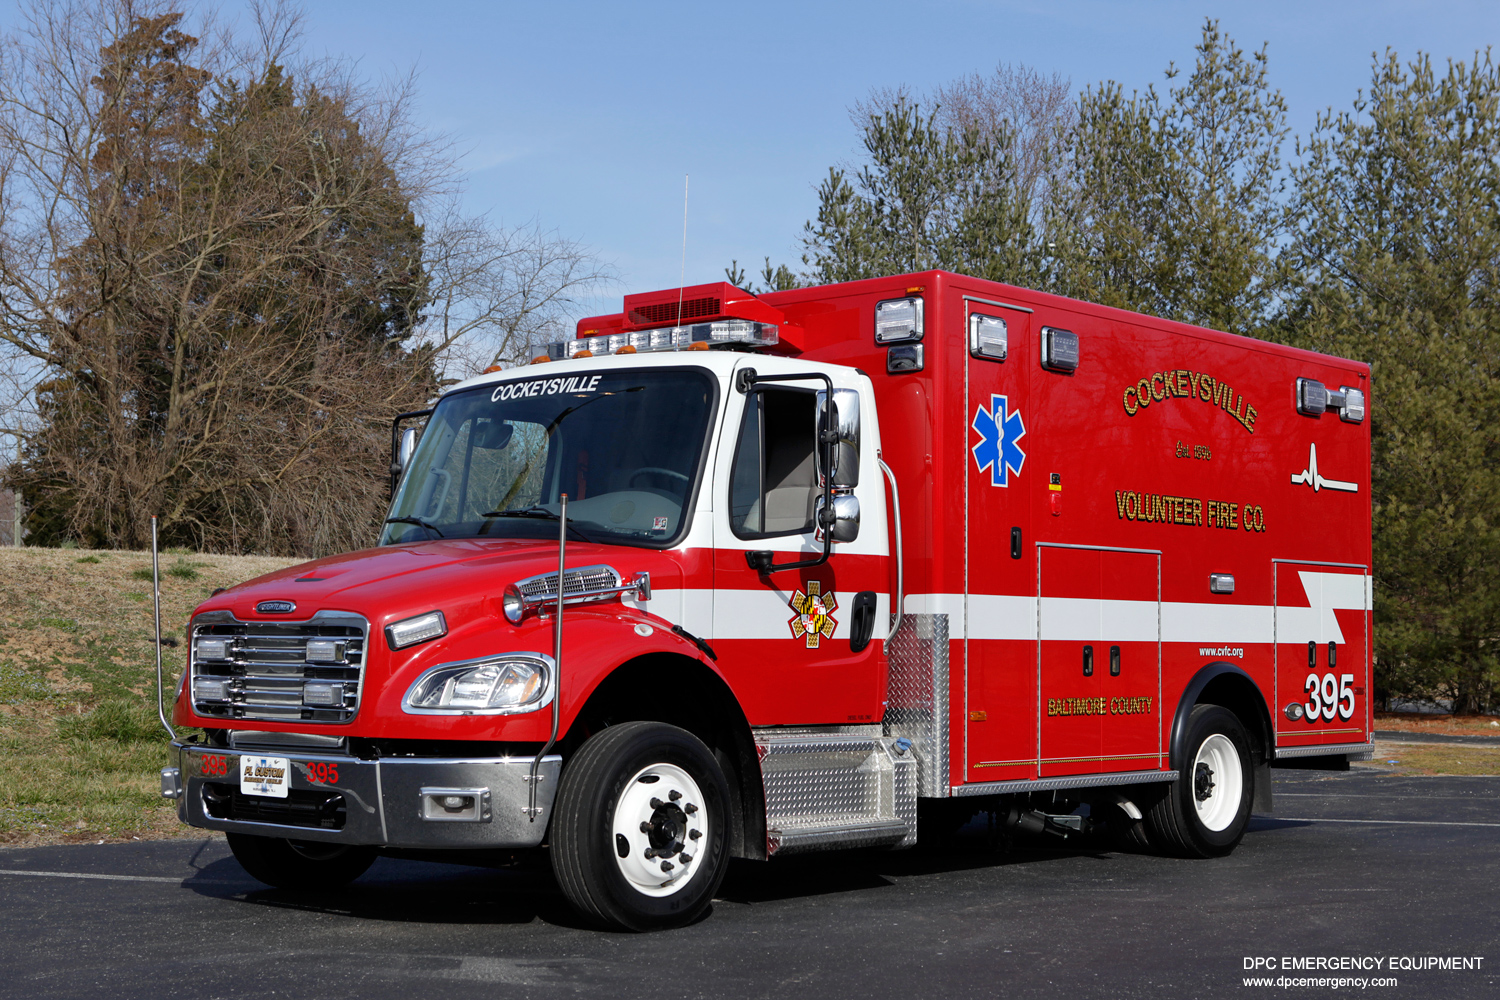 Featured image for “Cockeysville Volunteer Fire Company Baltimore County, MD – 2013 Freightliner M2 / PL Custom Titan Medium-Duty Ambulance”